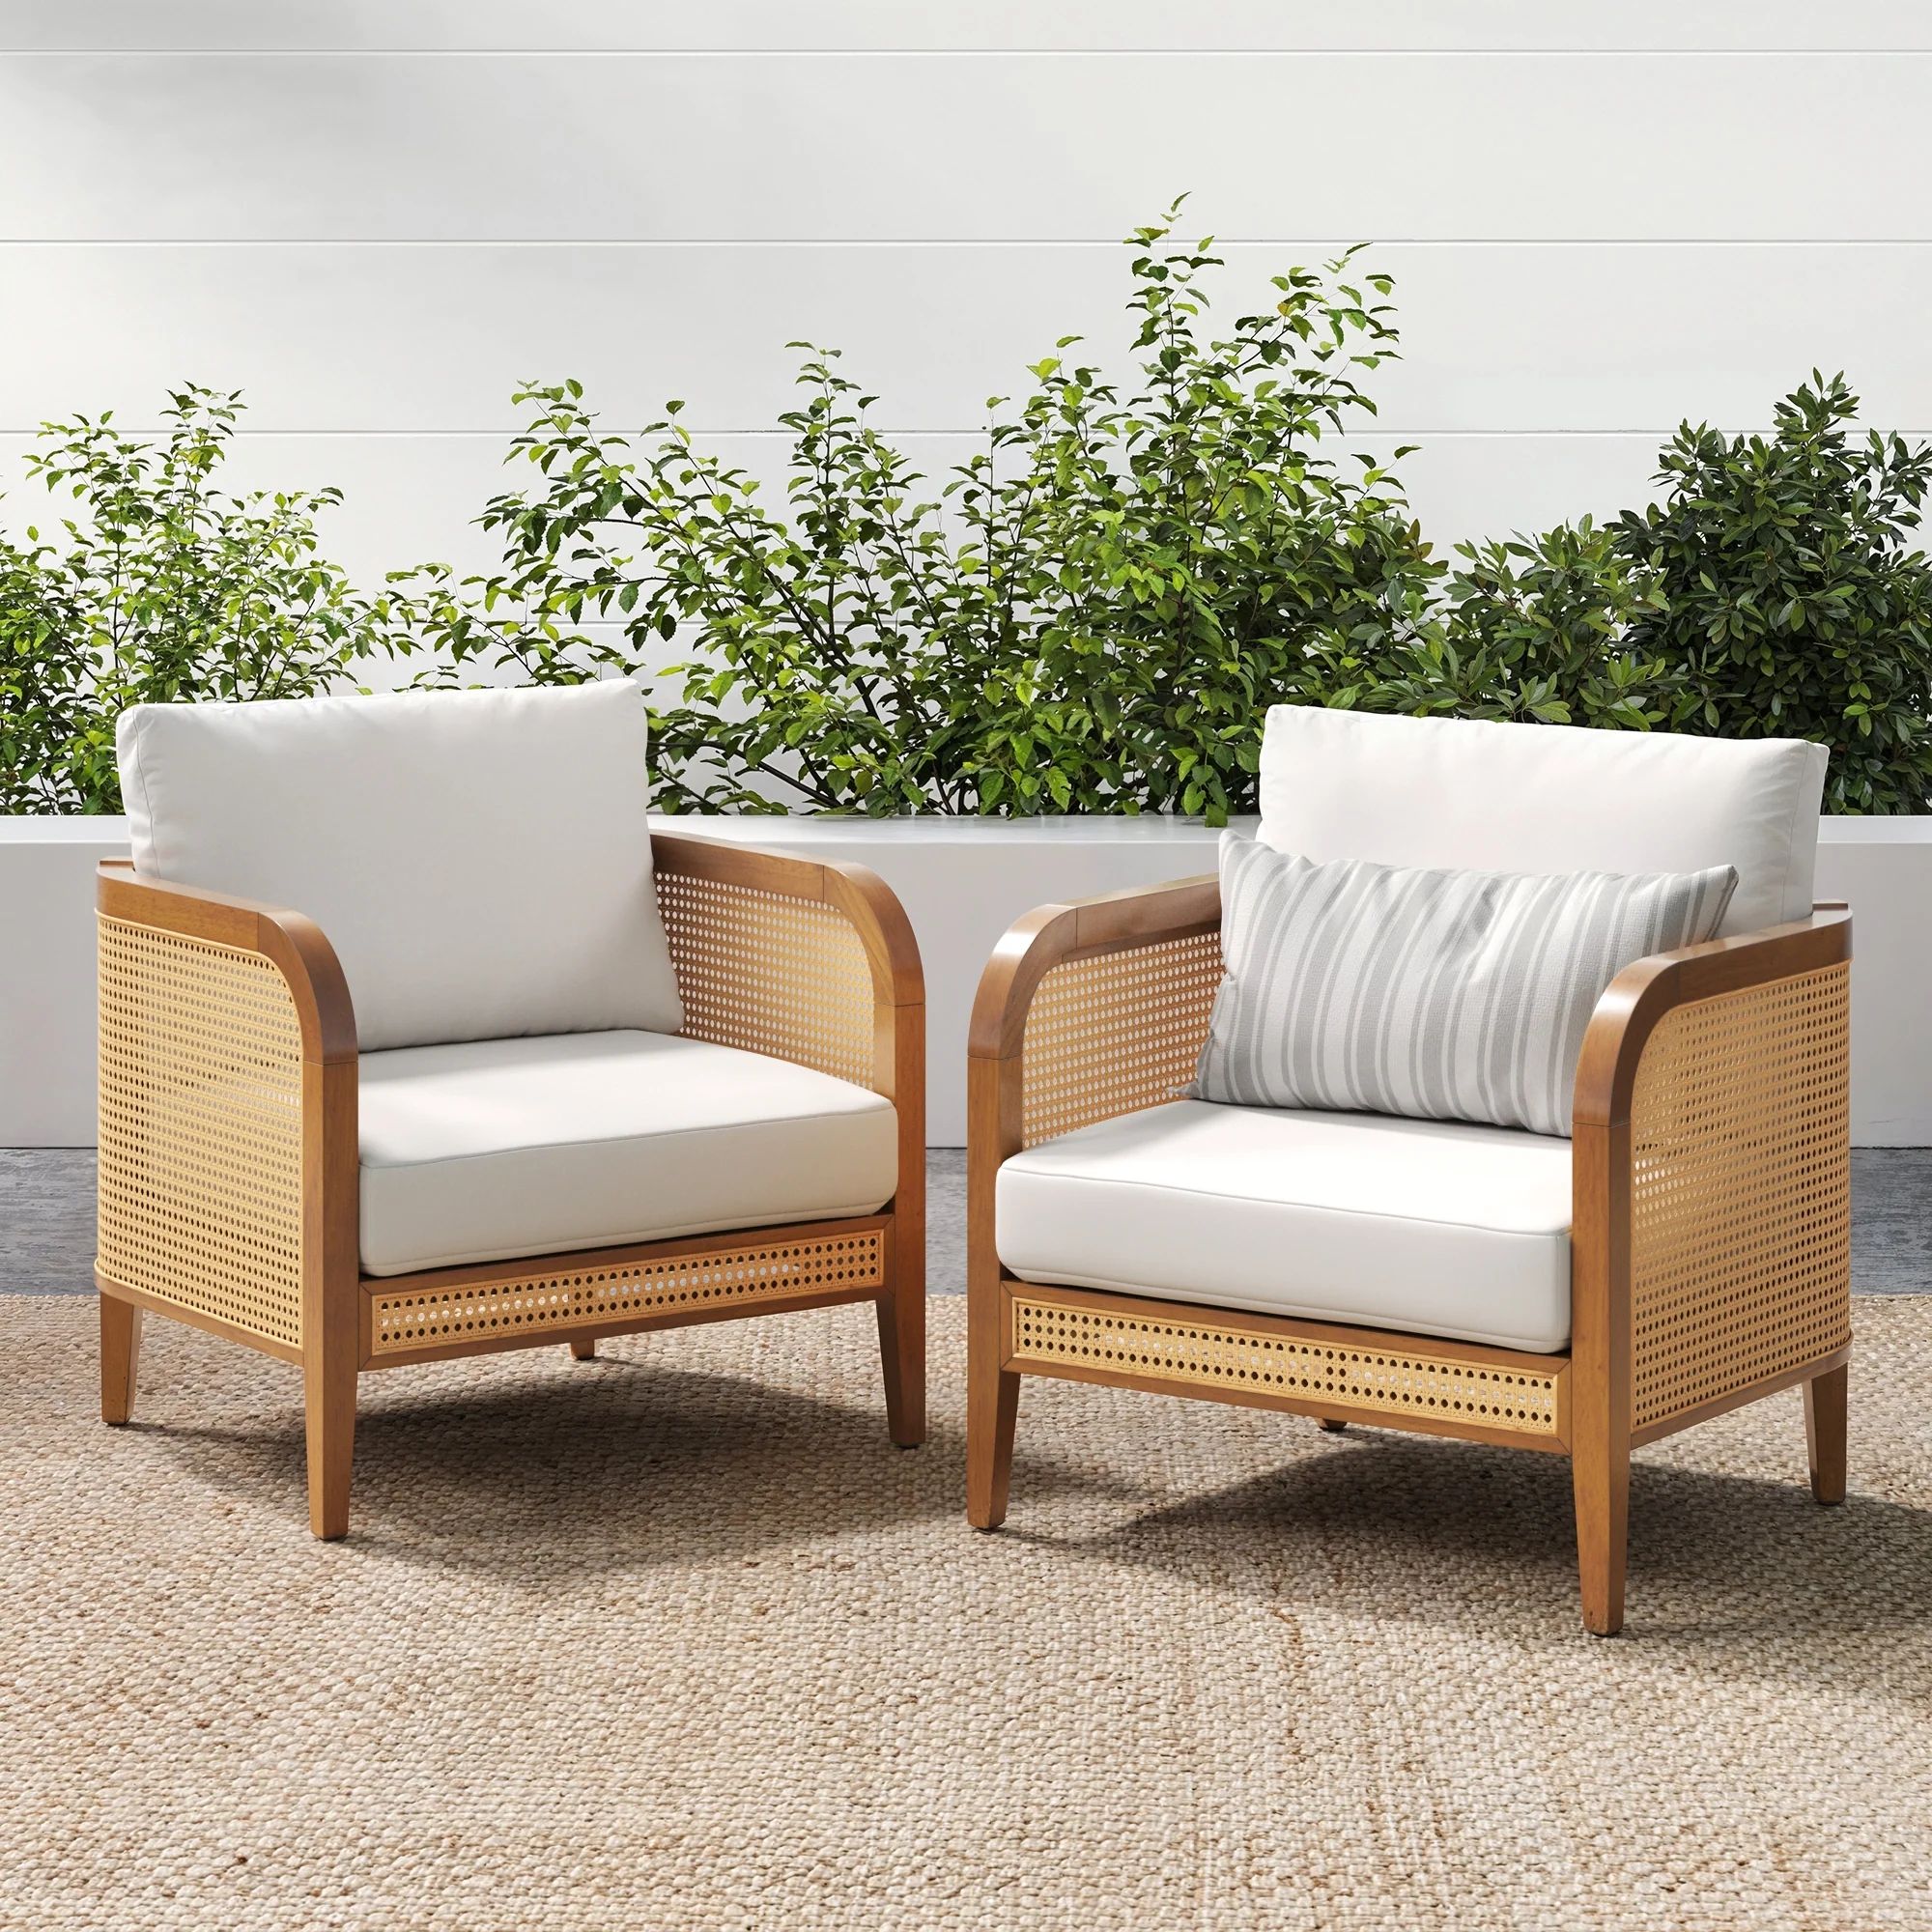 Set of 2 Rattan Outdoor Patio Arm Chairs | Nathan James